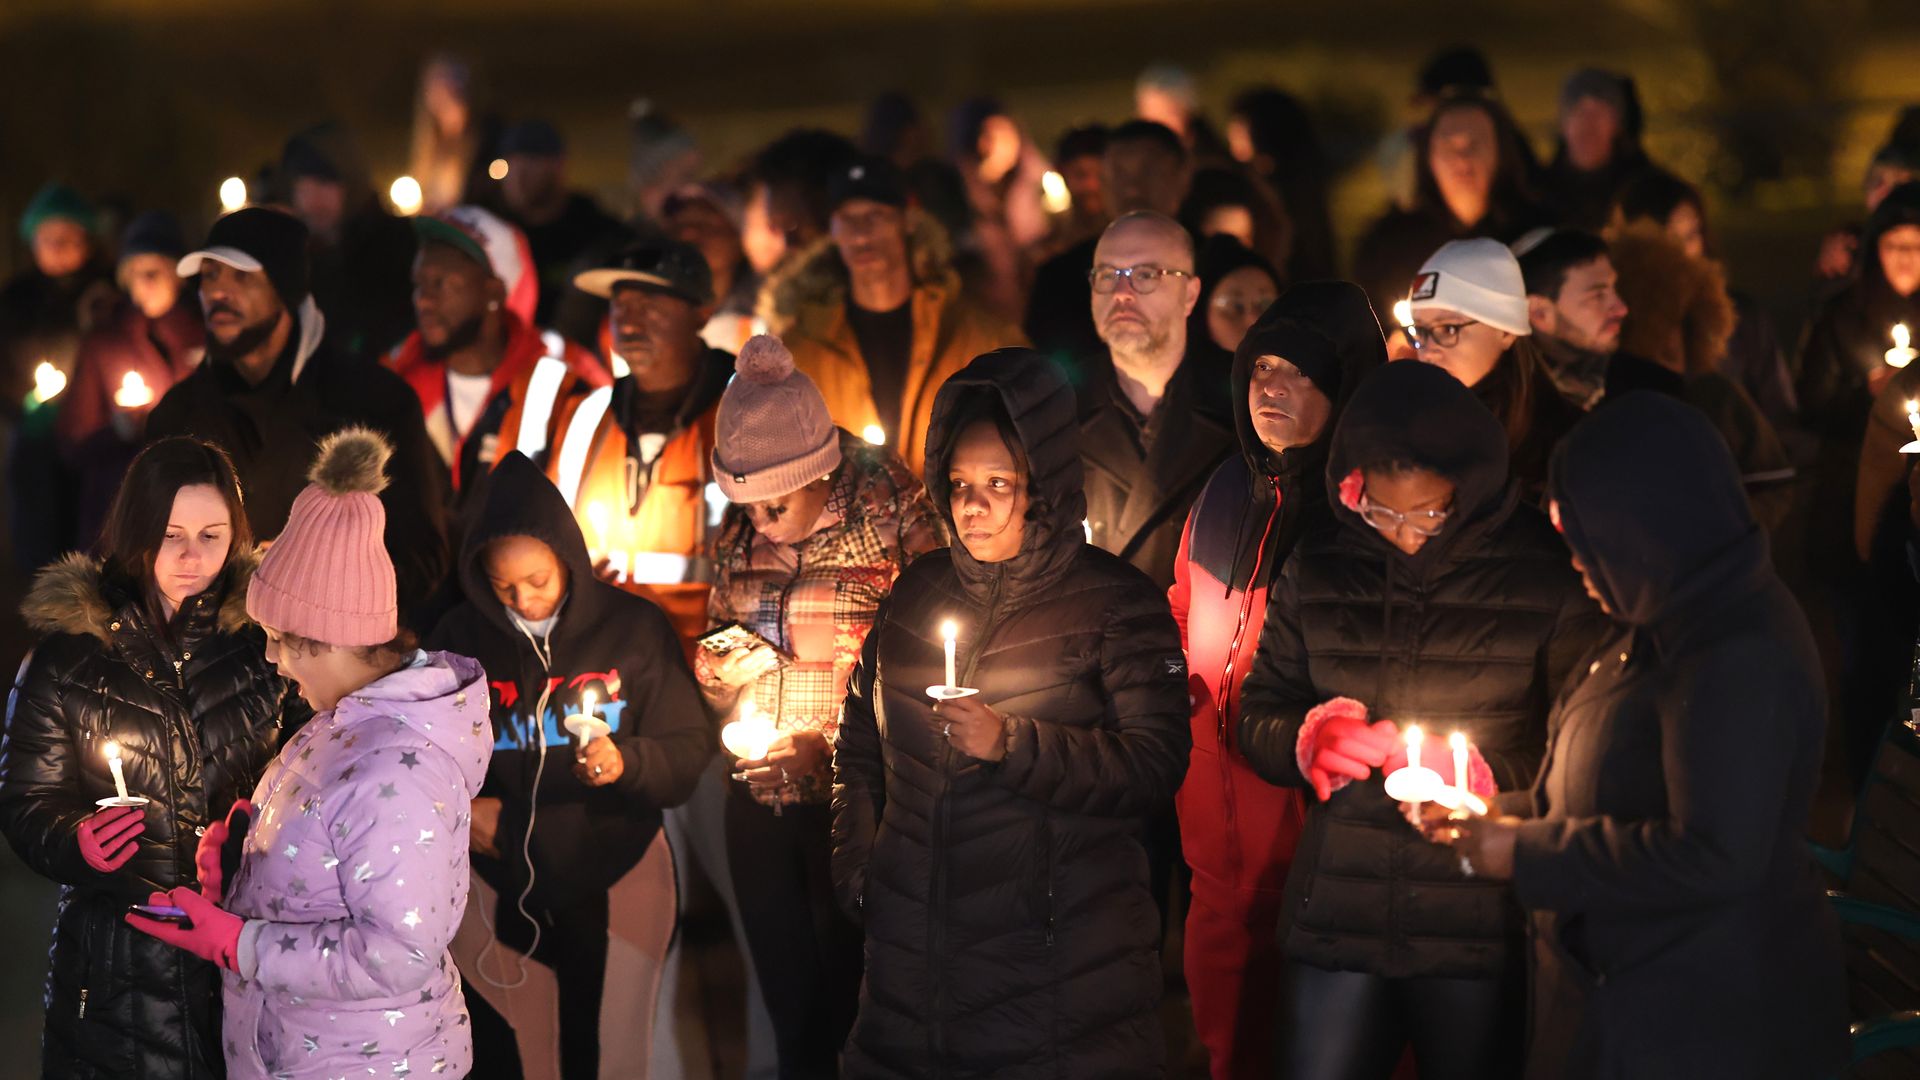 People attend a candlelight vigil in memory of Tyre Nichols at the Tobey Skate Park on January 26, 2023 in Memphis, Tennessee